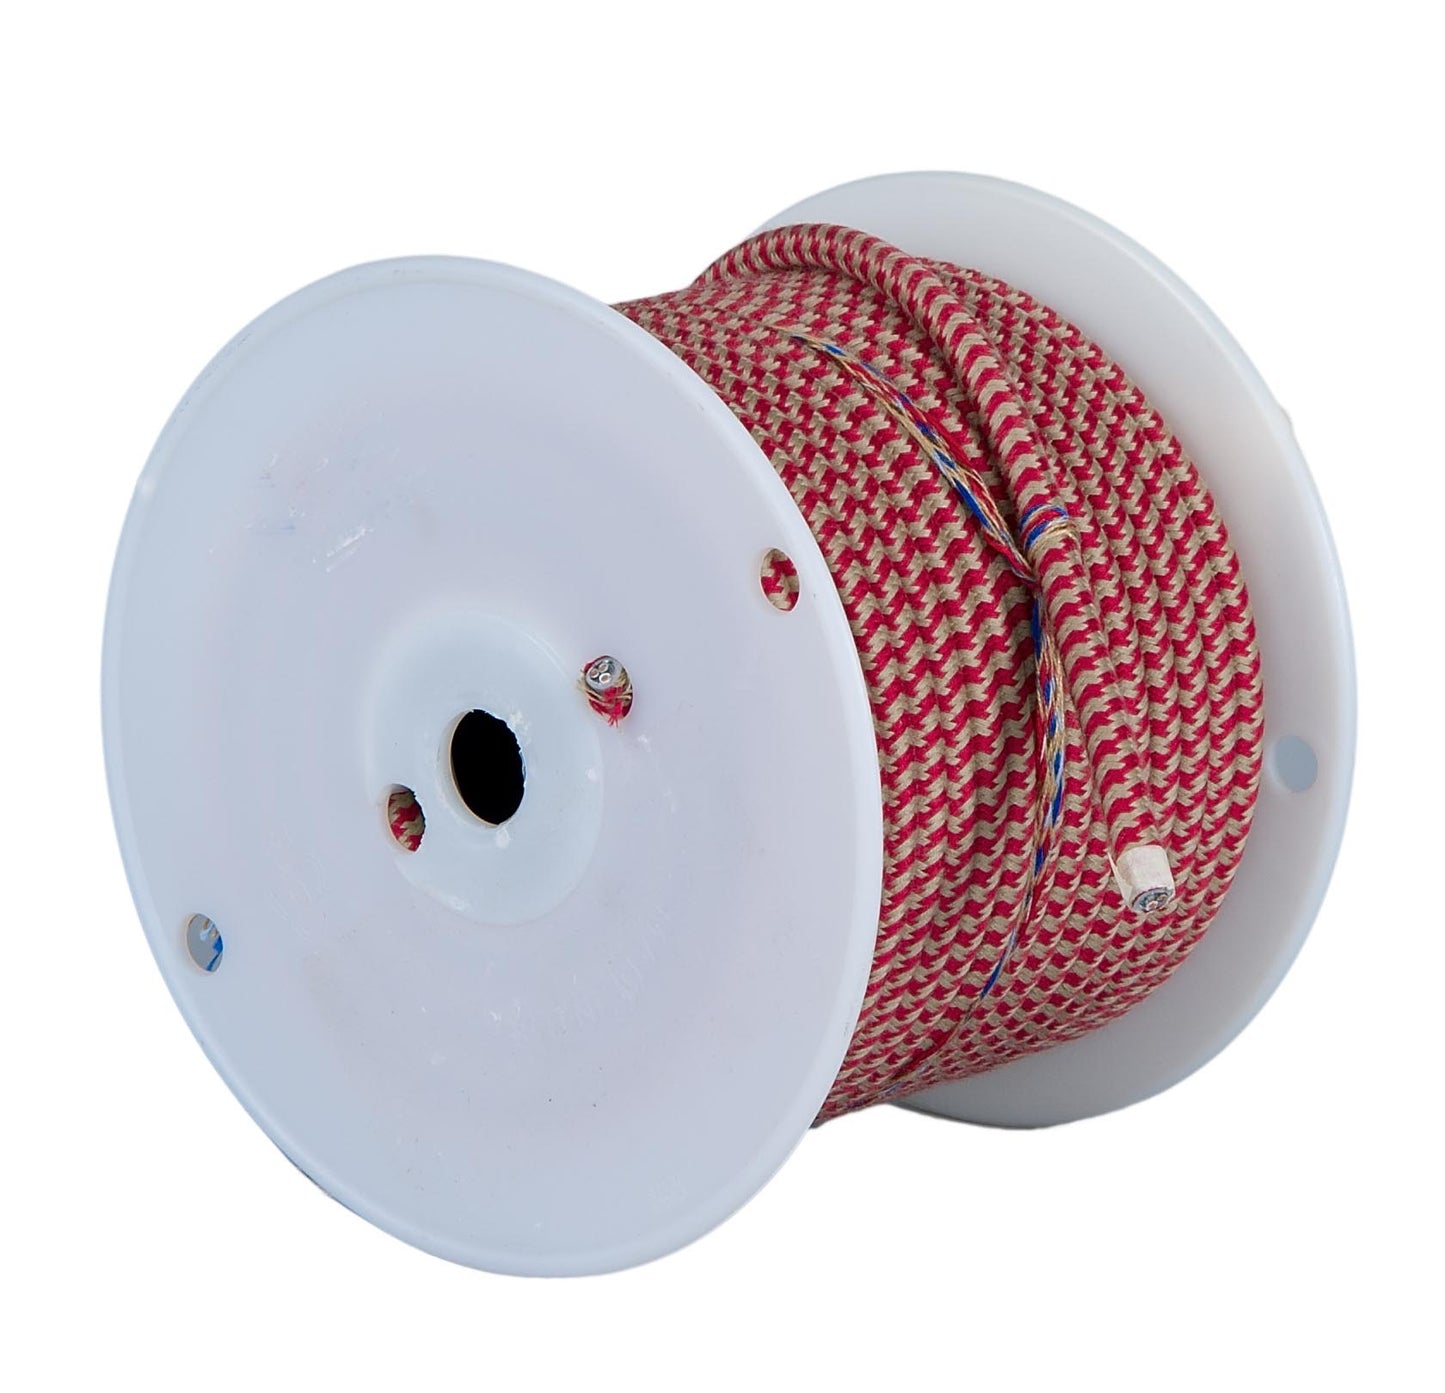 Putty and Red Color, COTTON Pulley 3-Wire Lamp Cord - Lamp Wire